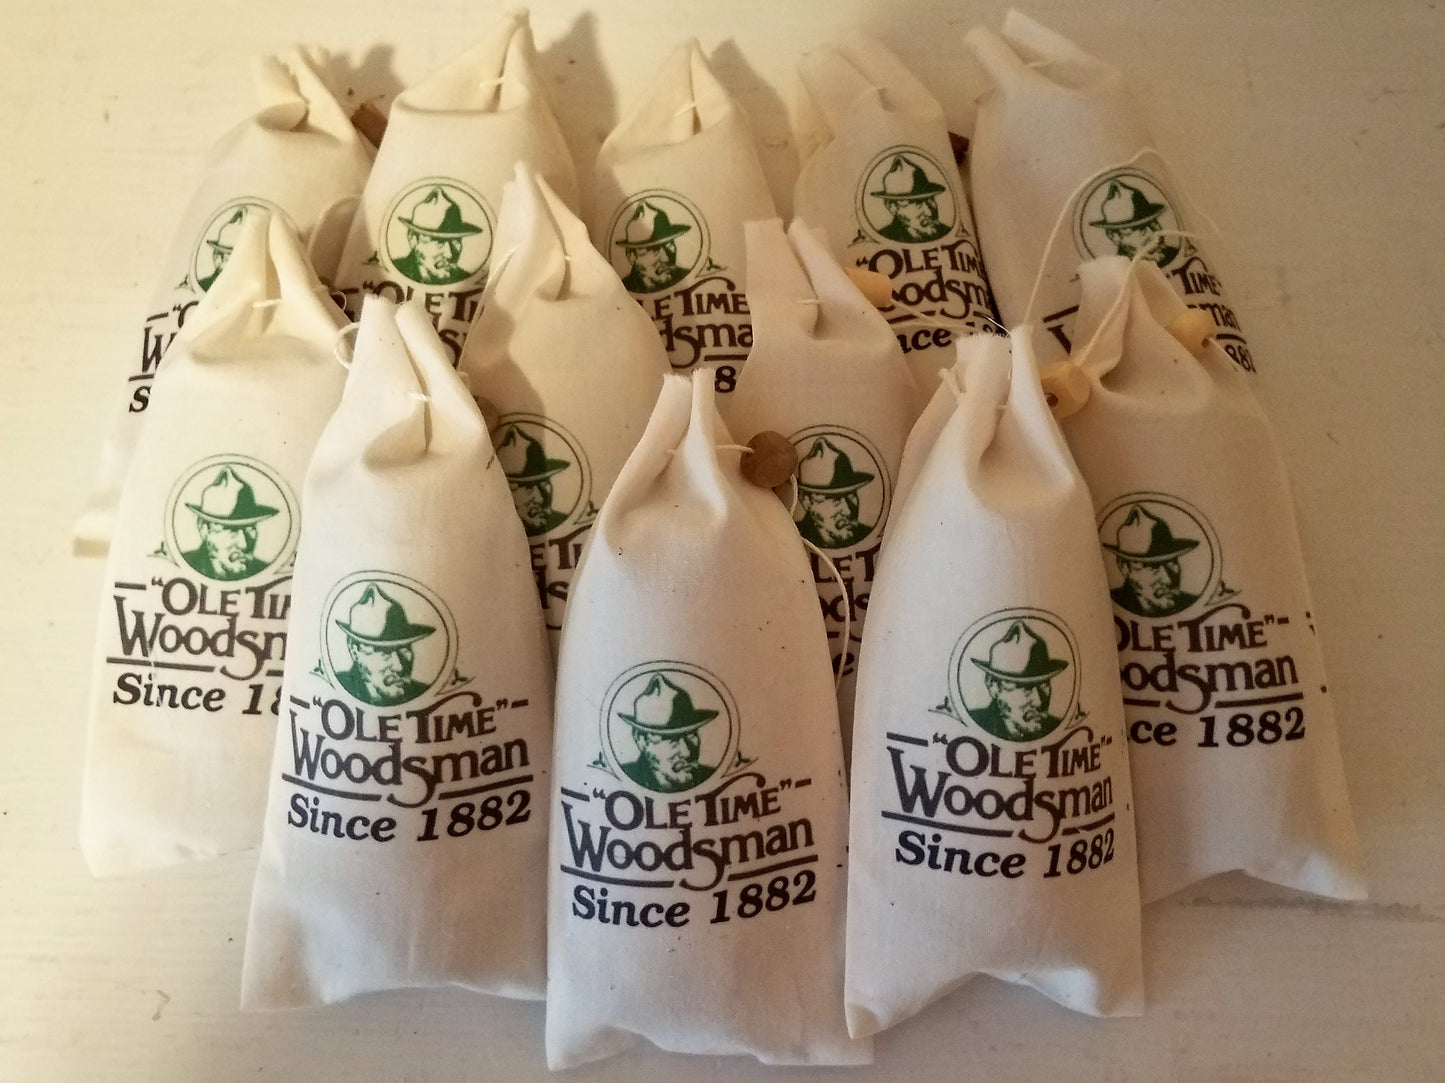 Ole Time Woodsman FLY DOPE Insect Repellent TWELVE BOTTLES with economy pricing. (Free Shipping In USA) - Ole Time Woodsman Fly Dope "Since 1882, The World's First and Best Protection Against All Biting Insects!"